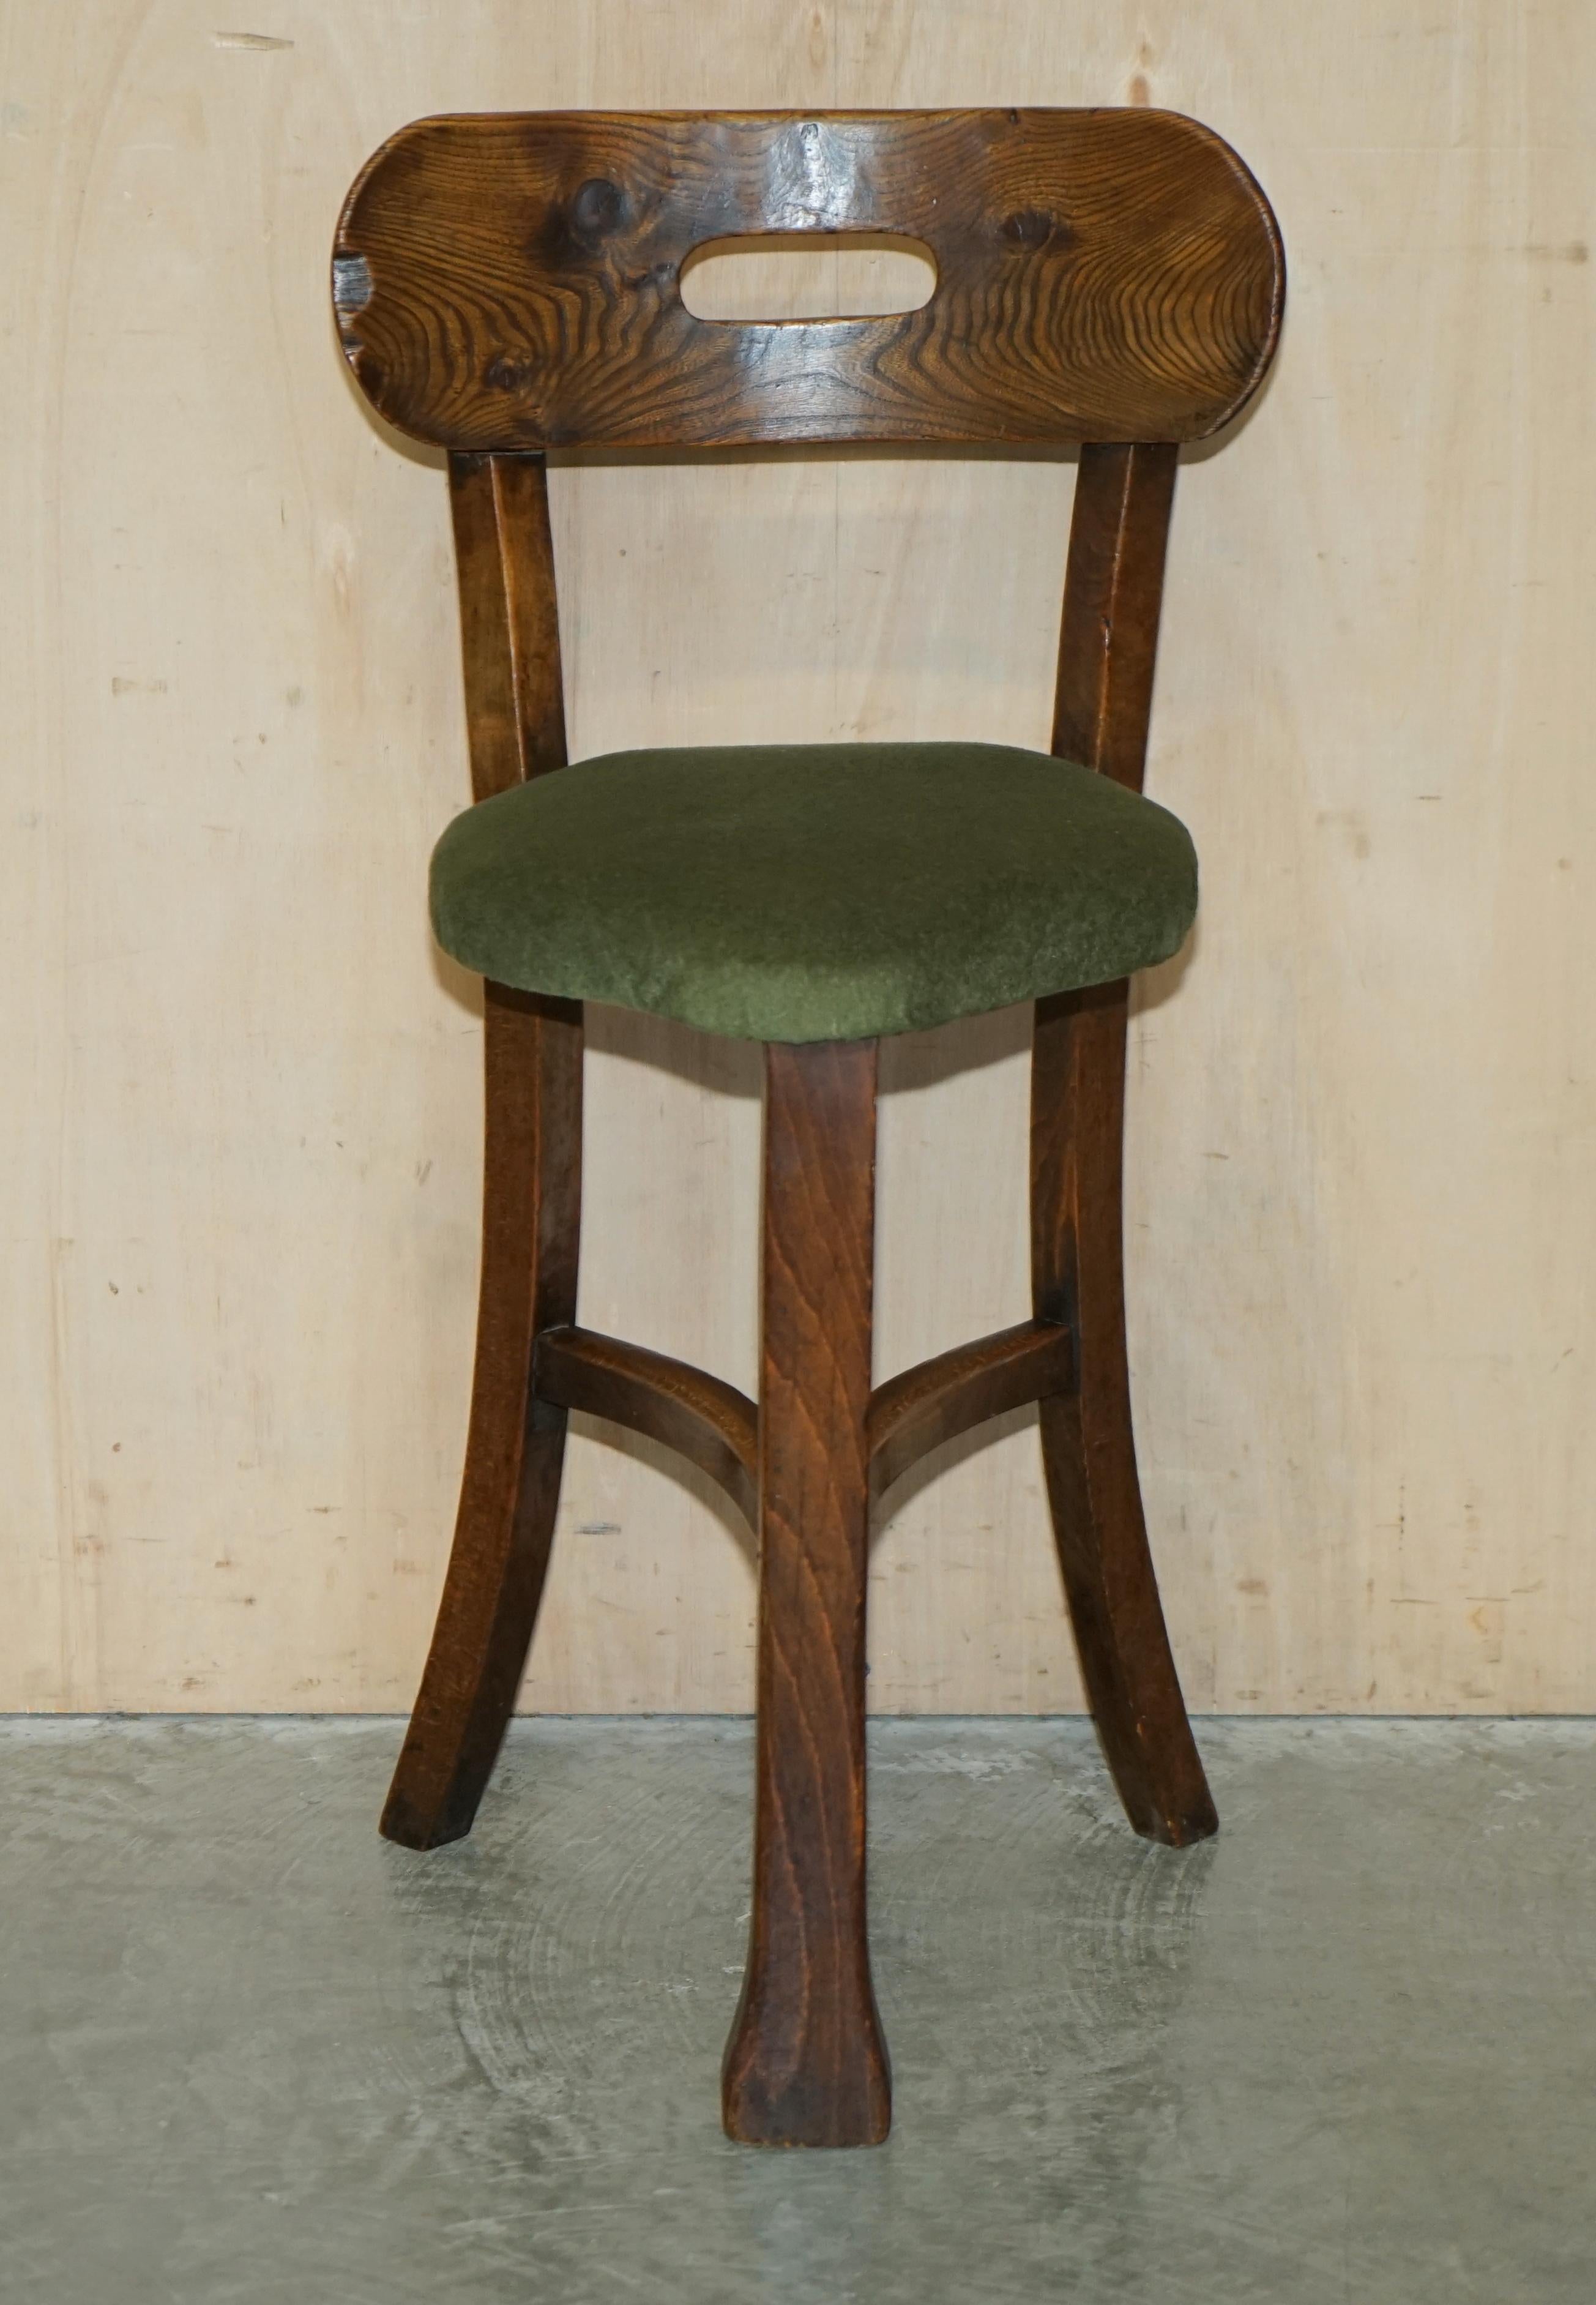 DREI ANTIQUE PRIMATIVE SOLID ELM ARTS & CRAFTS COCK FiGHTING CHAIRS / STOOLS im Angebot 7